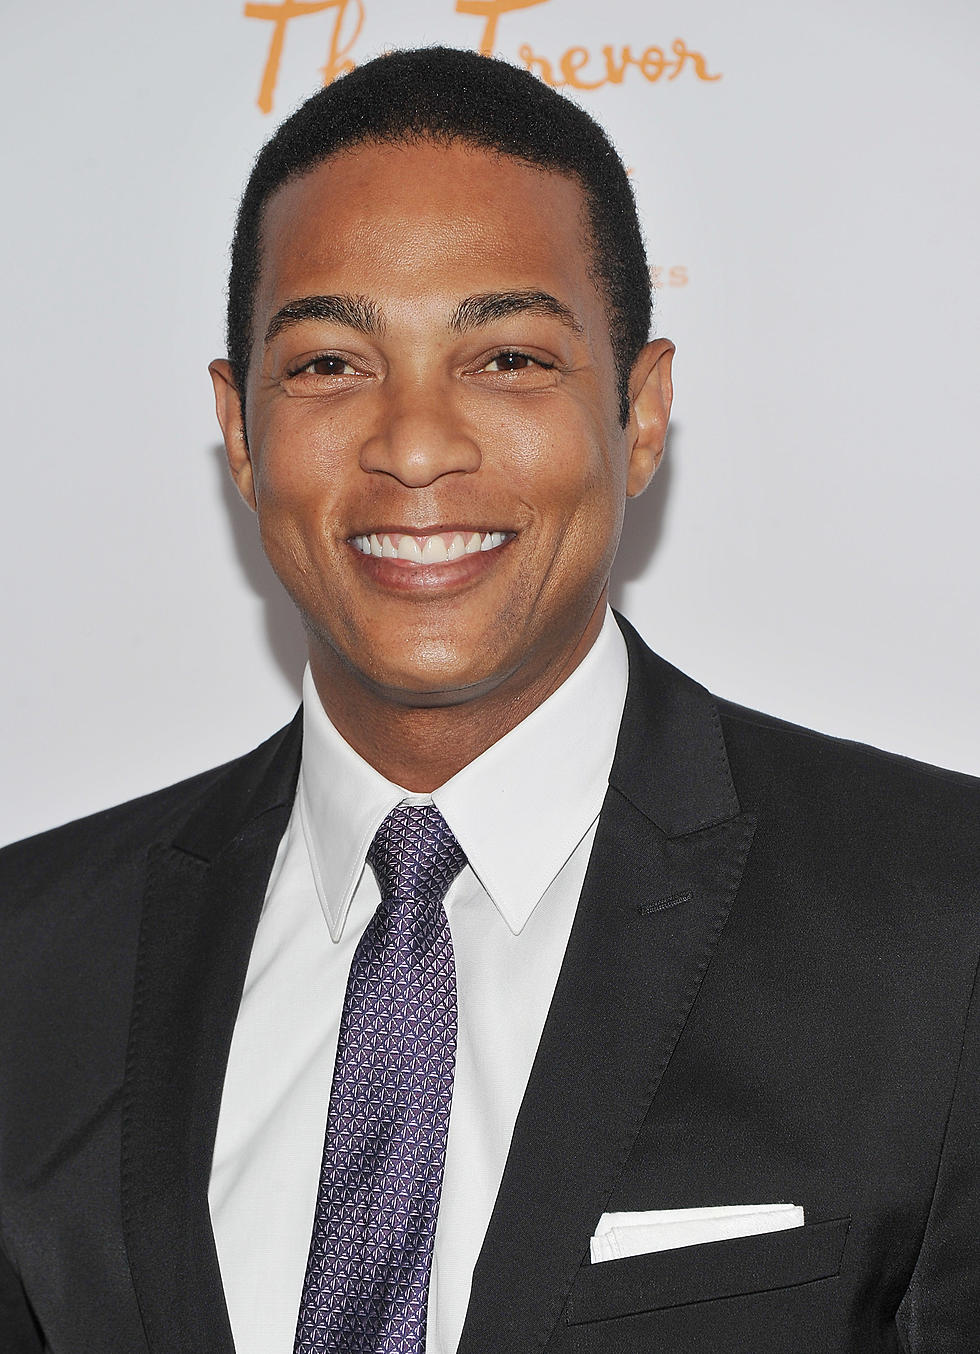 Don Lemon Defends His Comments On African-American Community [VIDEO]